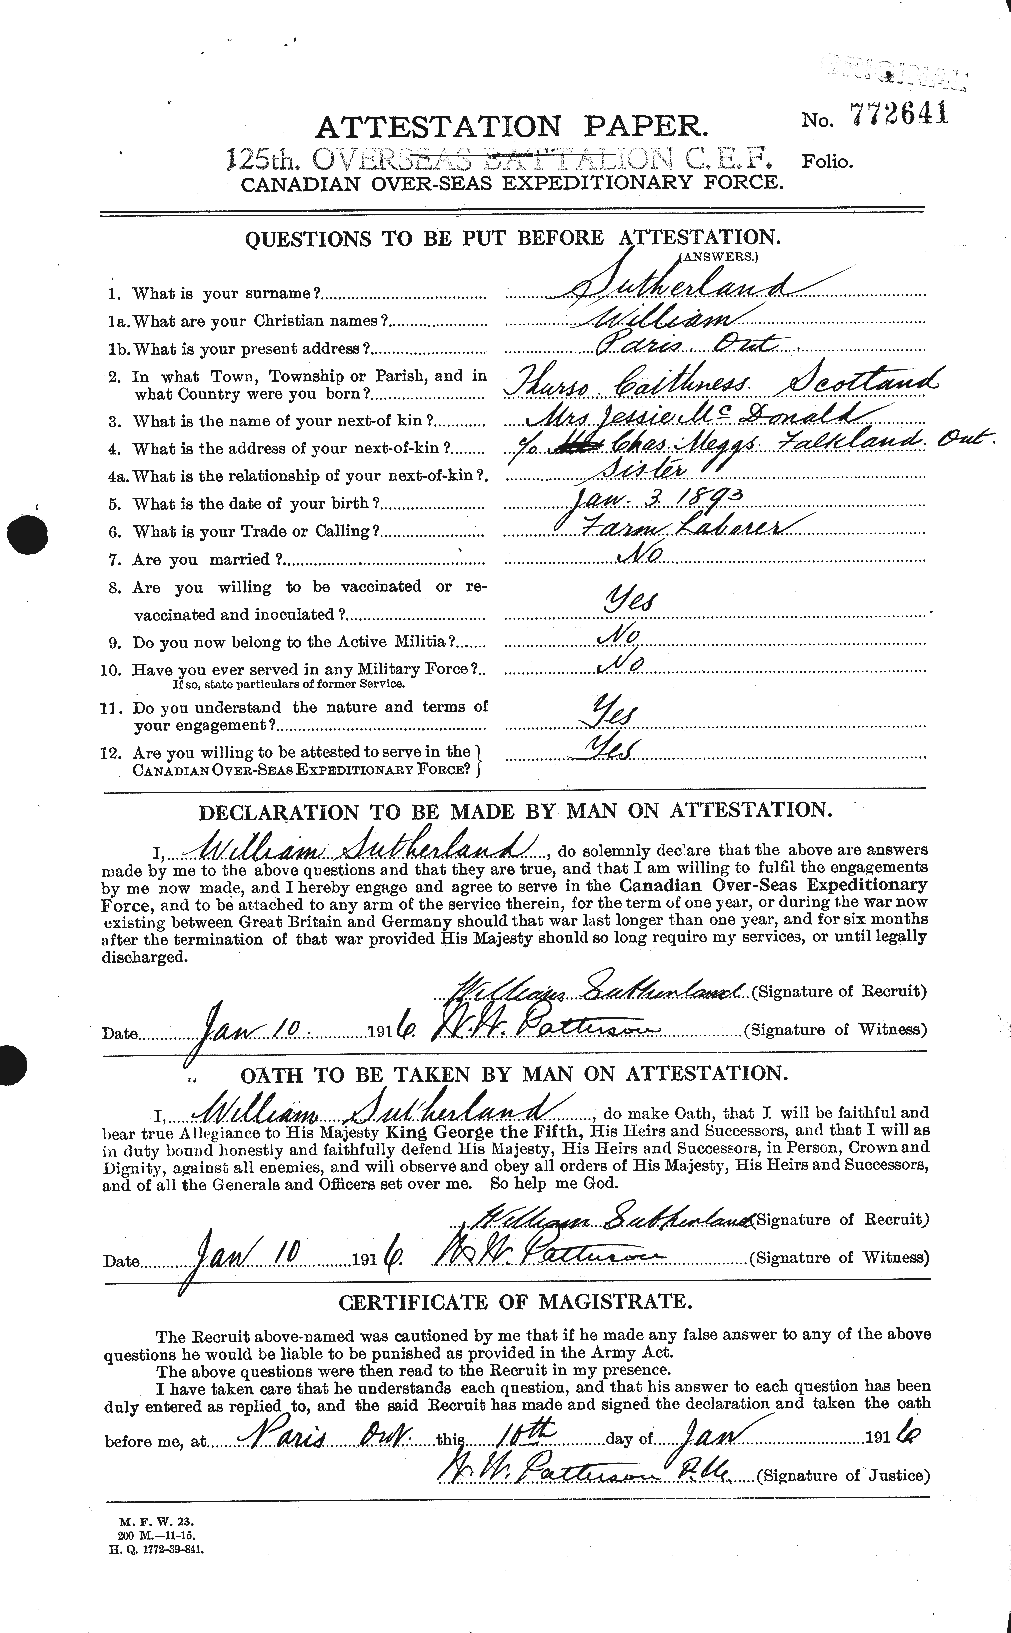 Personnel Records of the First World War - CEF 126529a